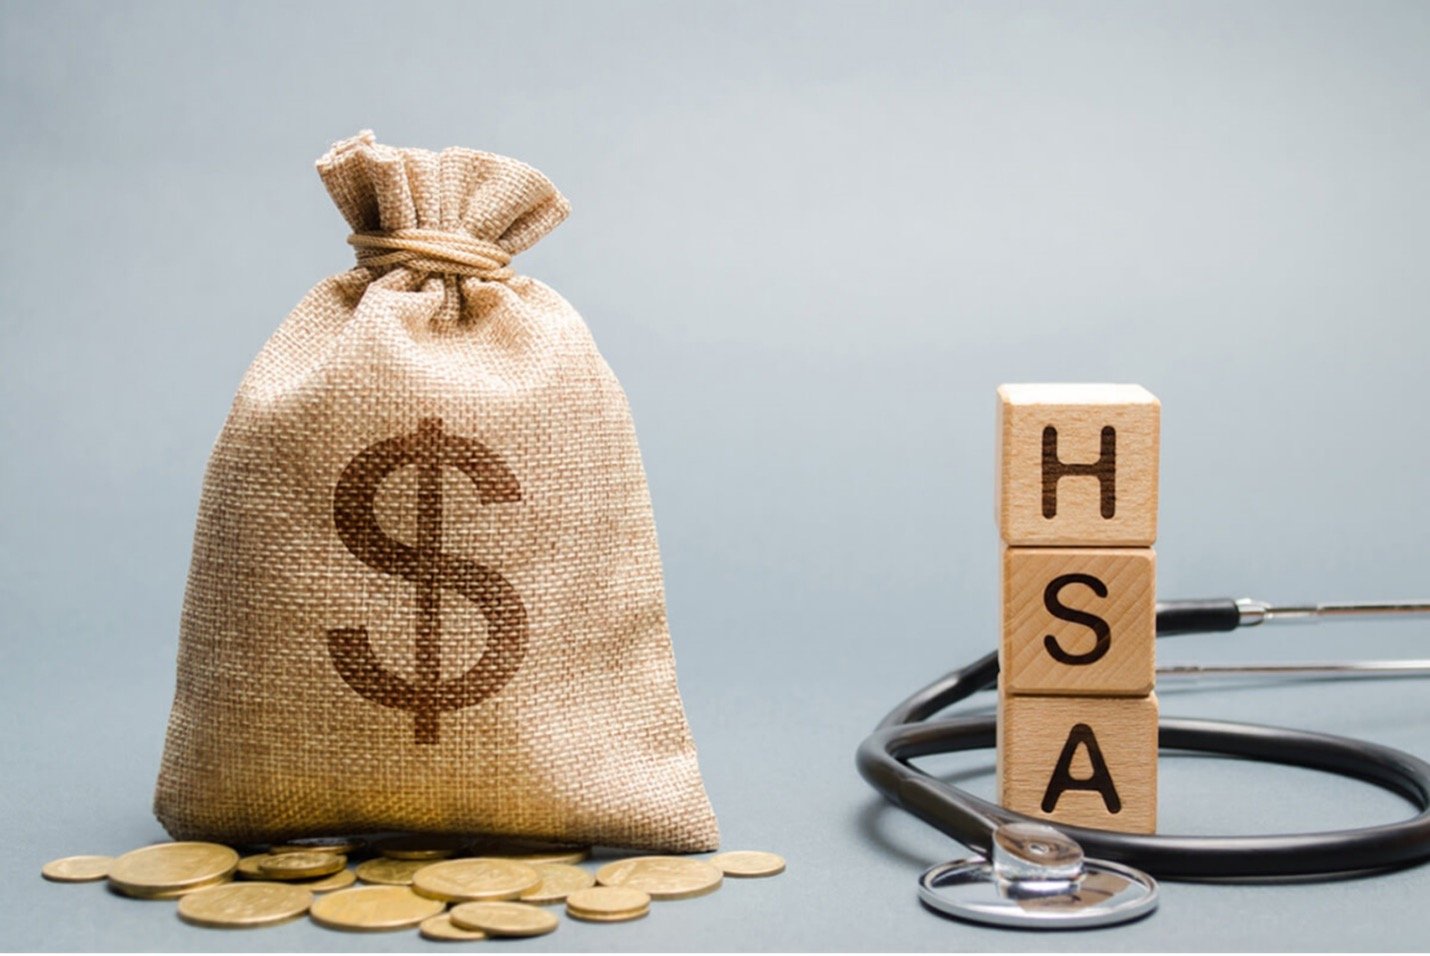 What Are the Pros and Cons of a Health Savings Account (HSA)?